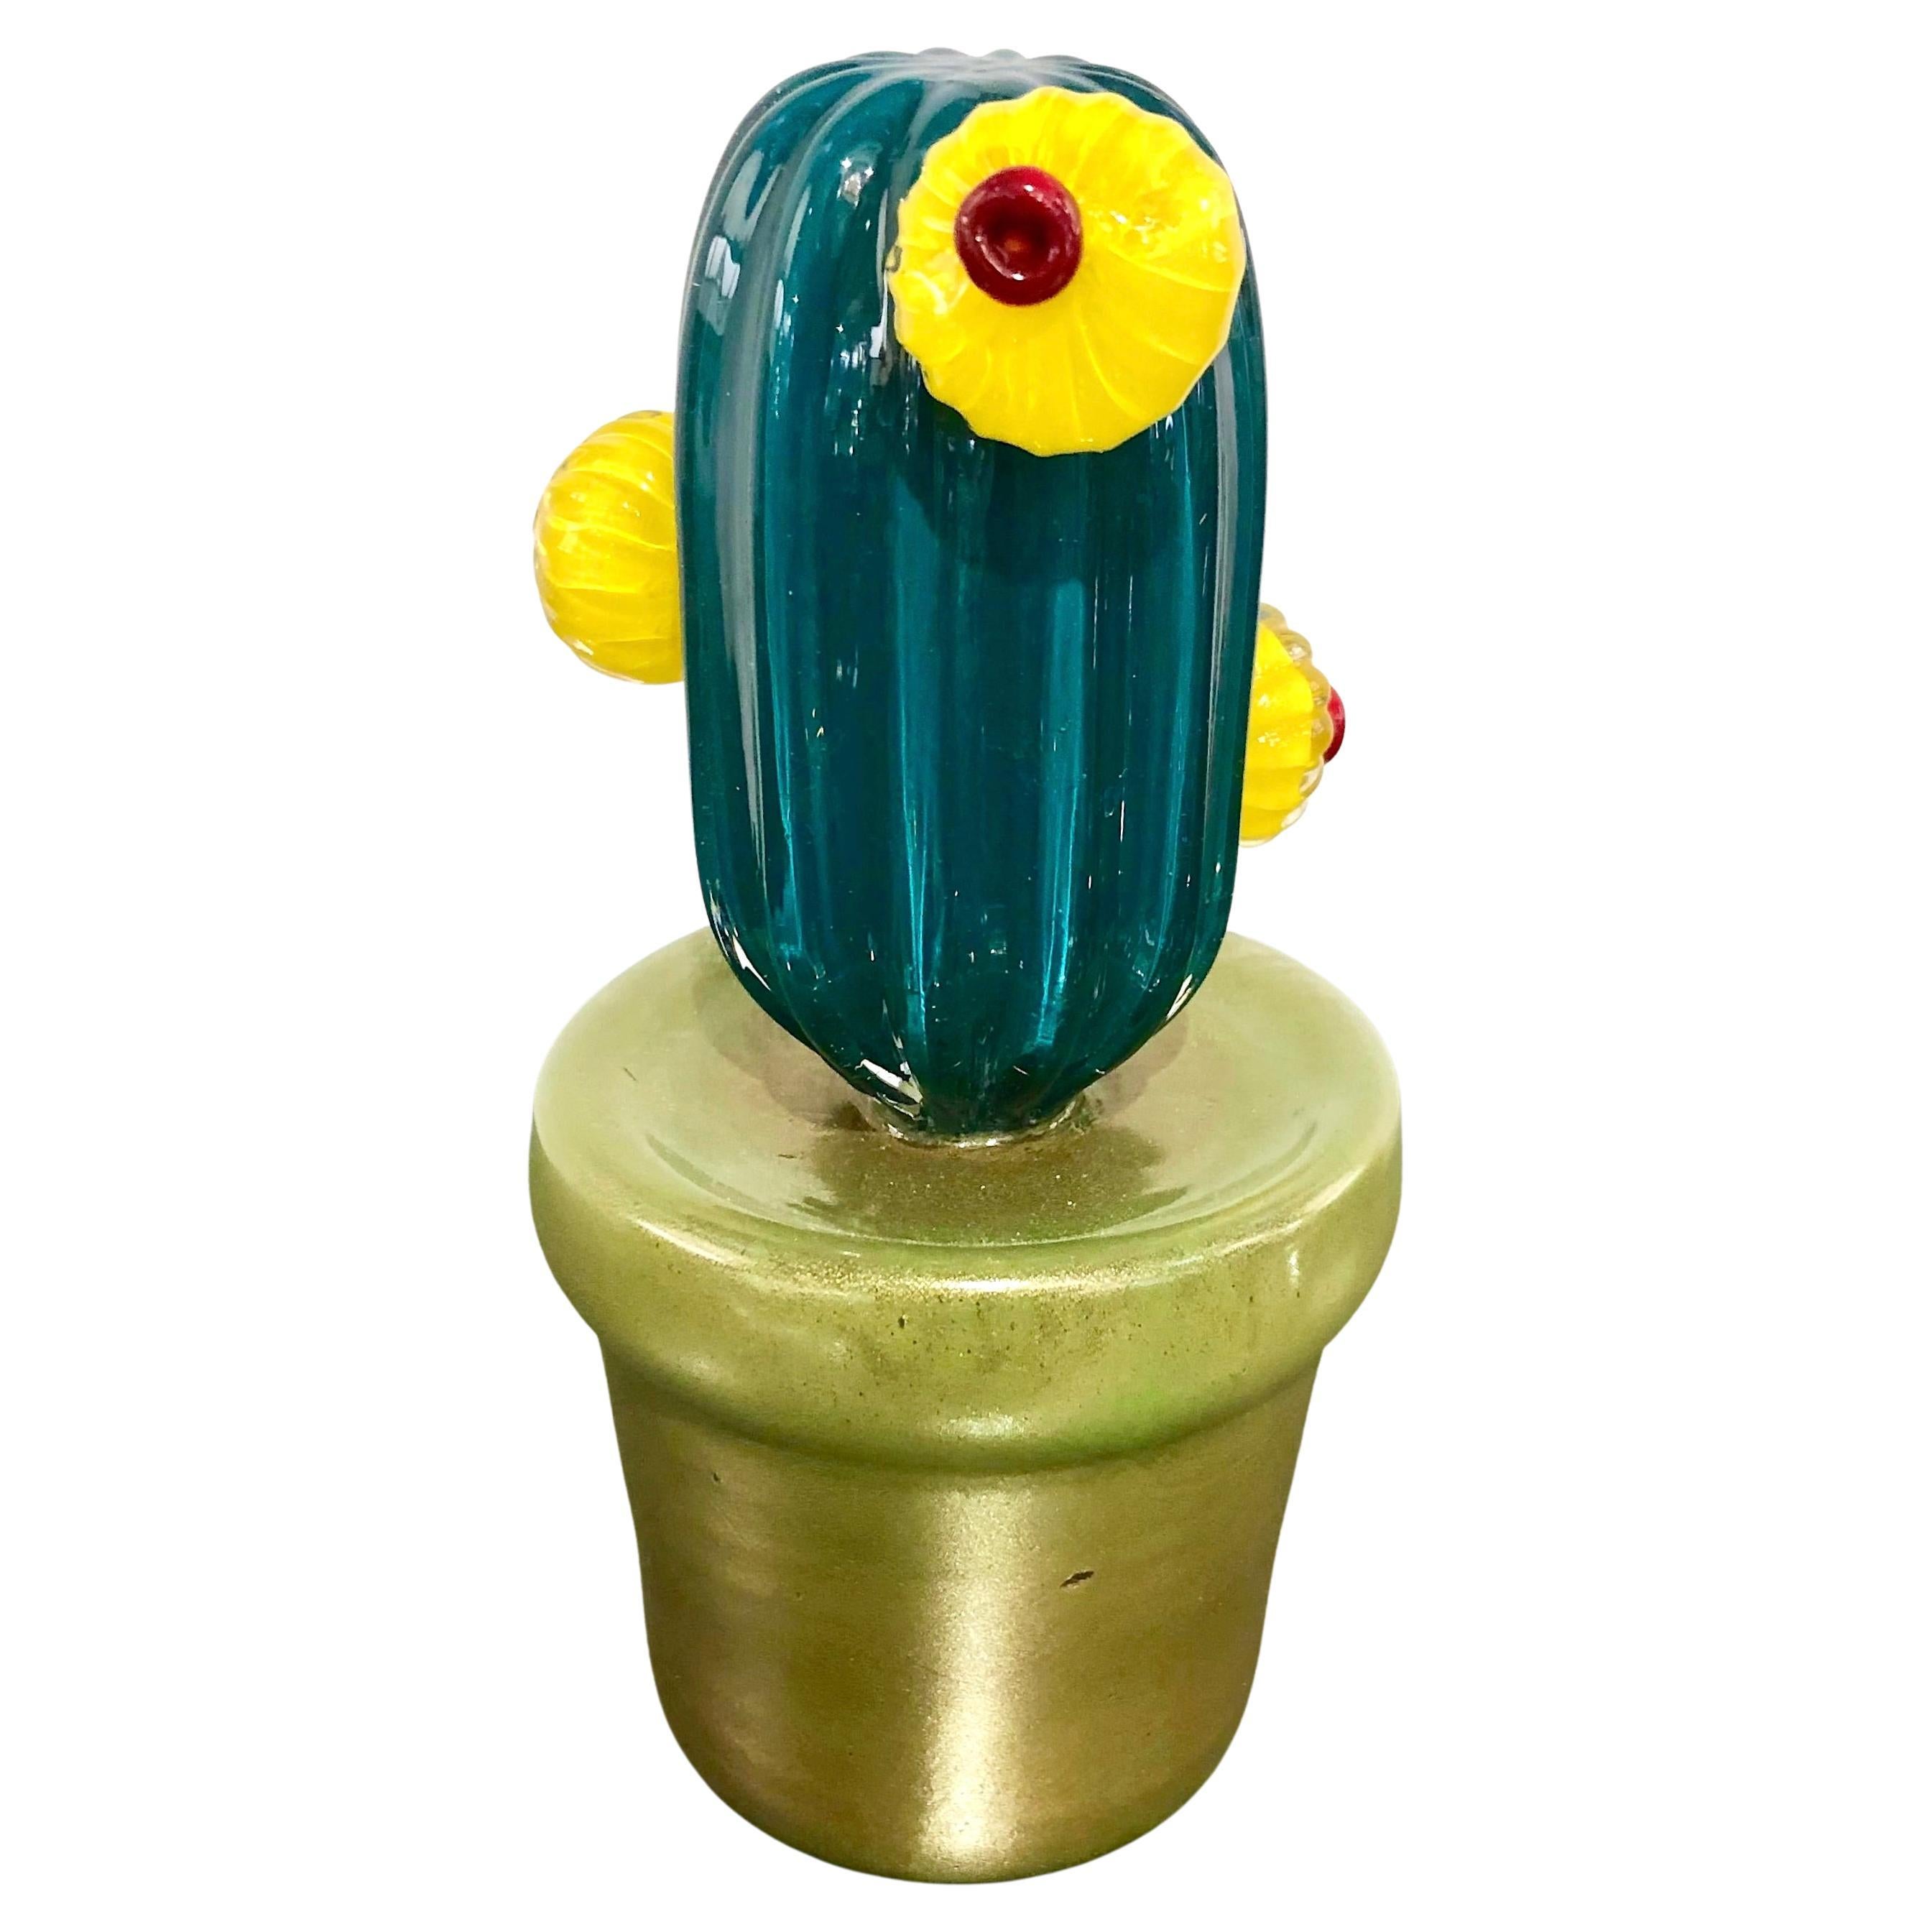 2000s Italian Teal Gold Green Murano Art Glass Cactus Plant with Yellow Flowers For Sale